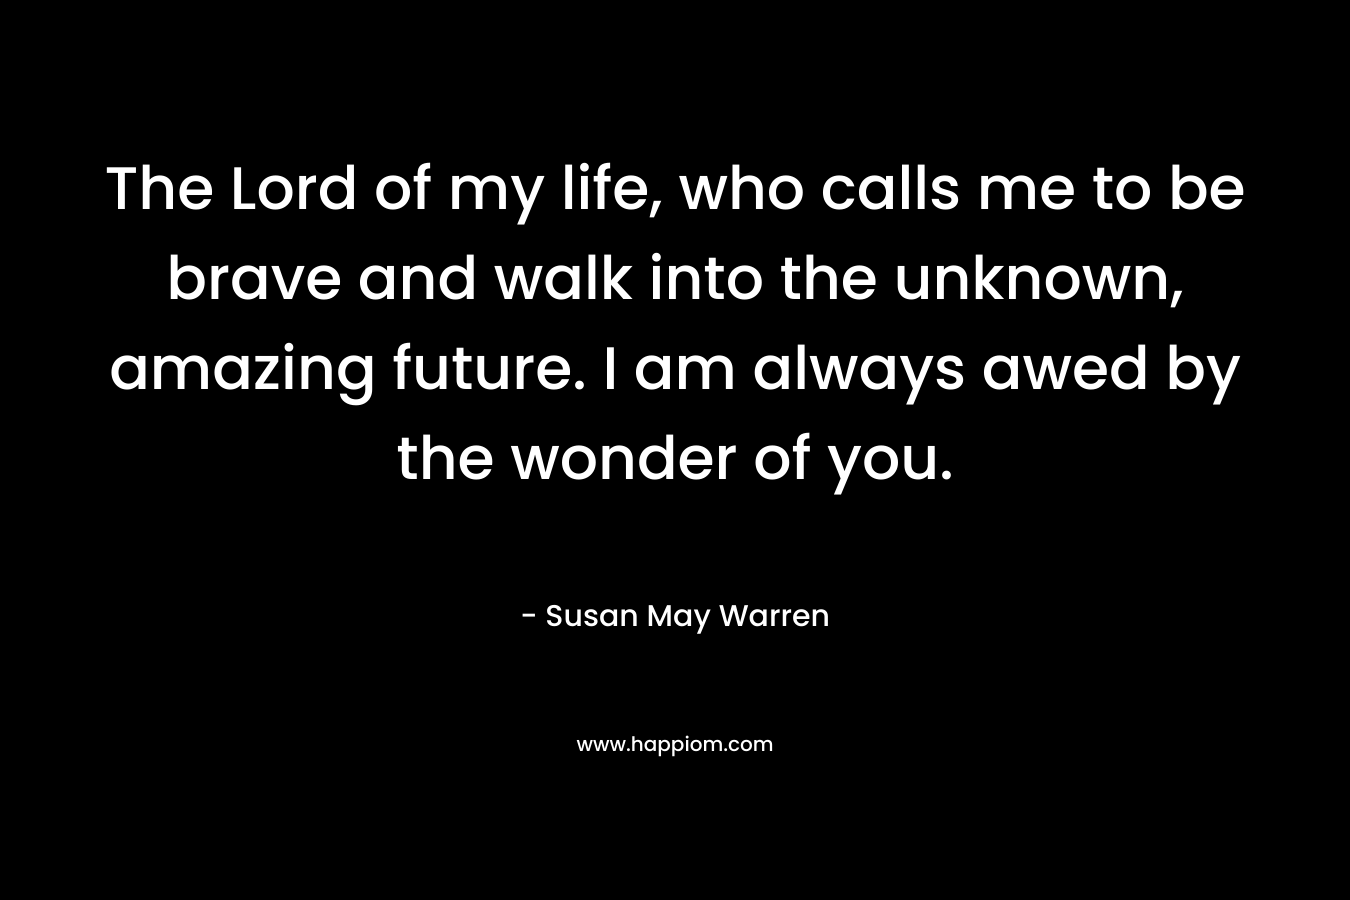 The Lord of my life, who calls me to be brave and walk into the unknown, amazing future. I am always awed by the wonder of you. – Susan May Warren